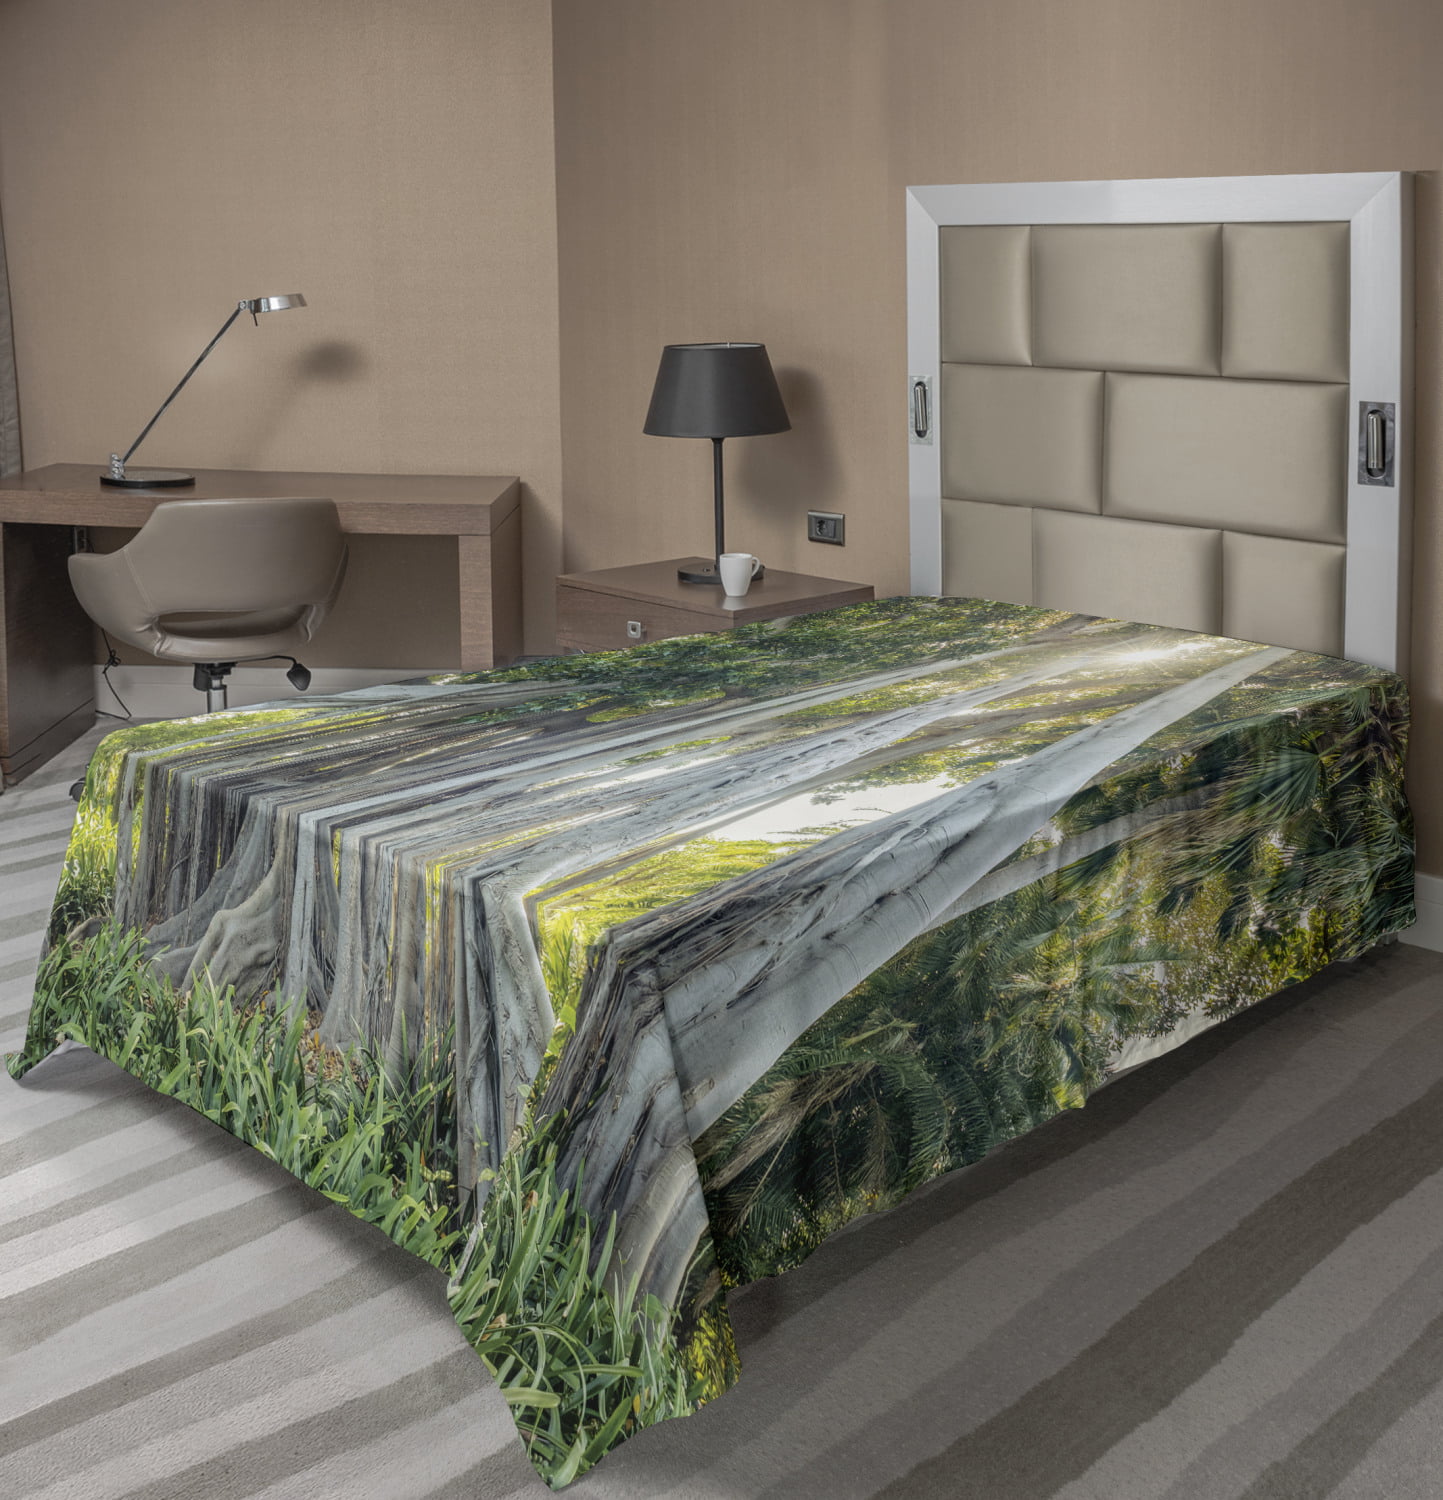 Details about   Ambesonne Abstract Ink Flat Sheet Top Sheet Decorative Bedding 6 Sizes 